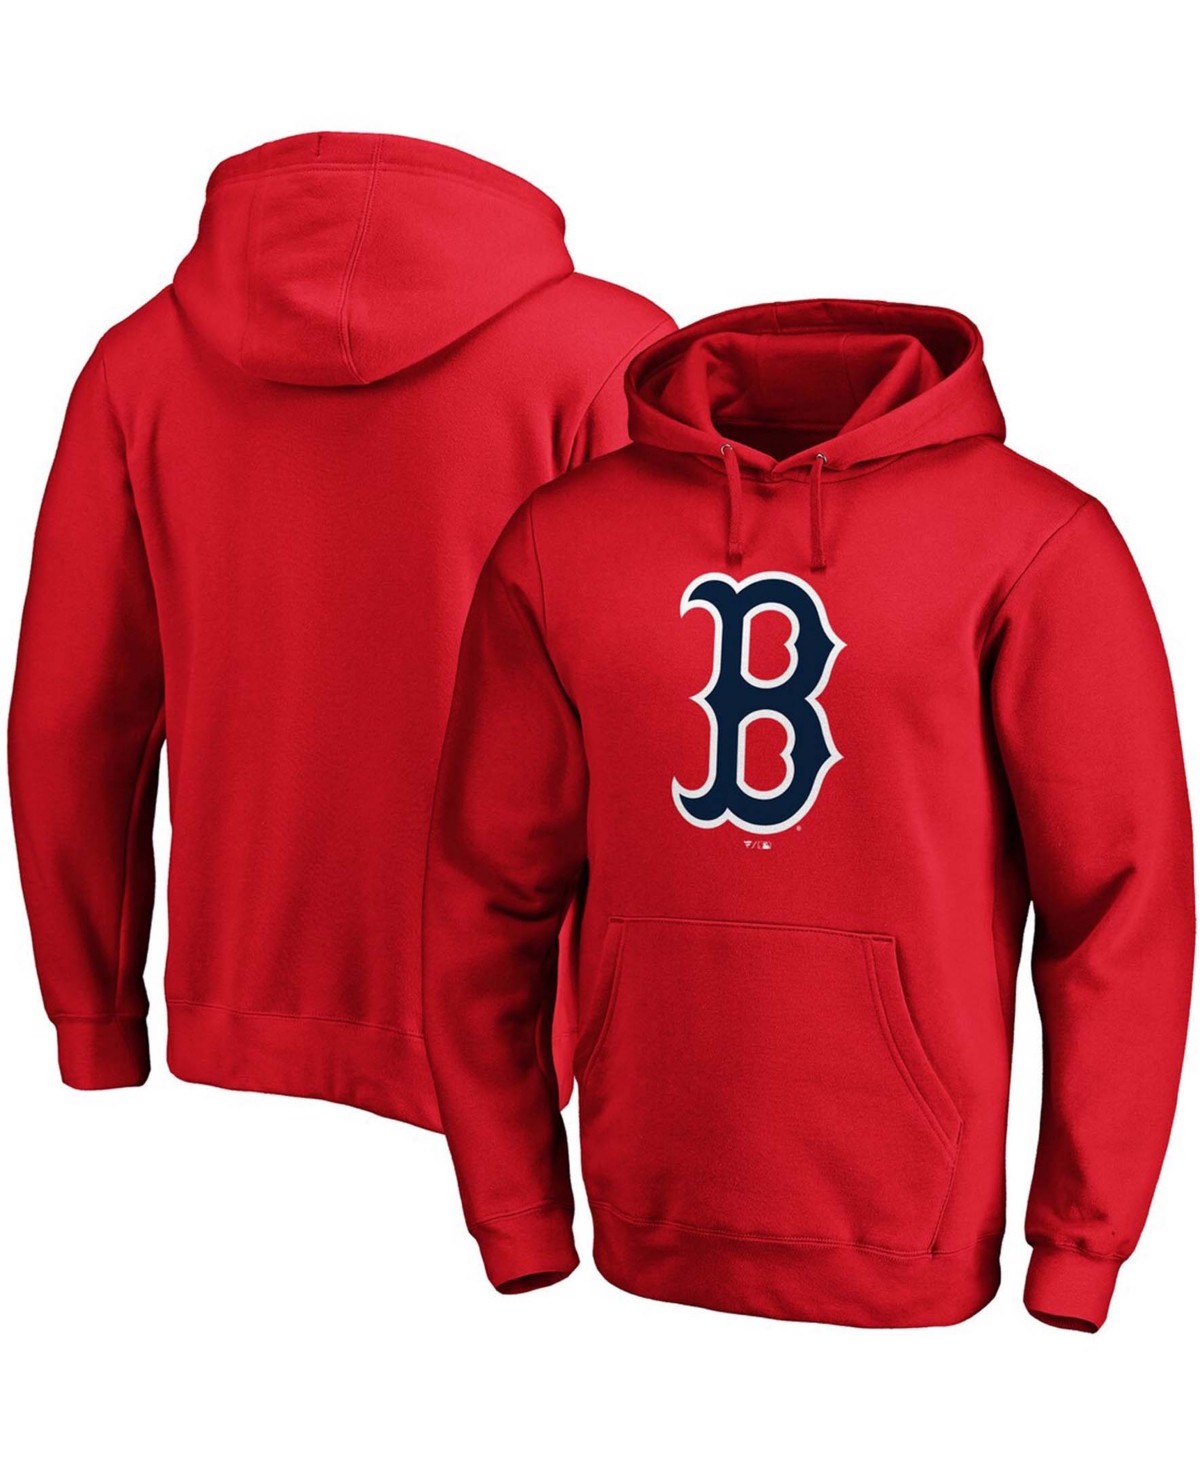 Fanatics Men's Red Boston Red Sox Official Logo Pullover Hoodie